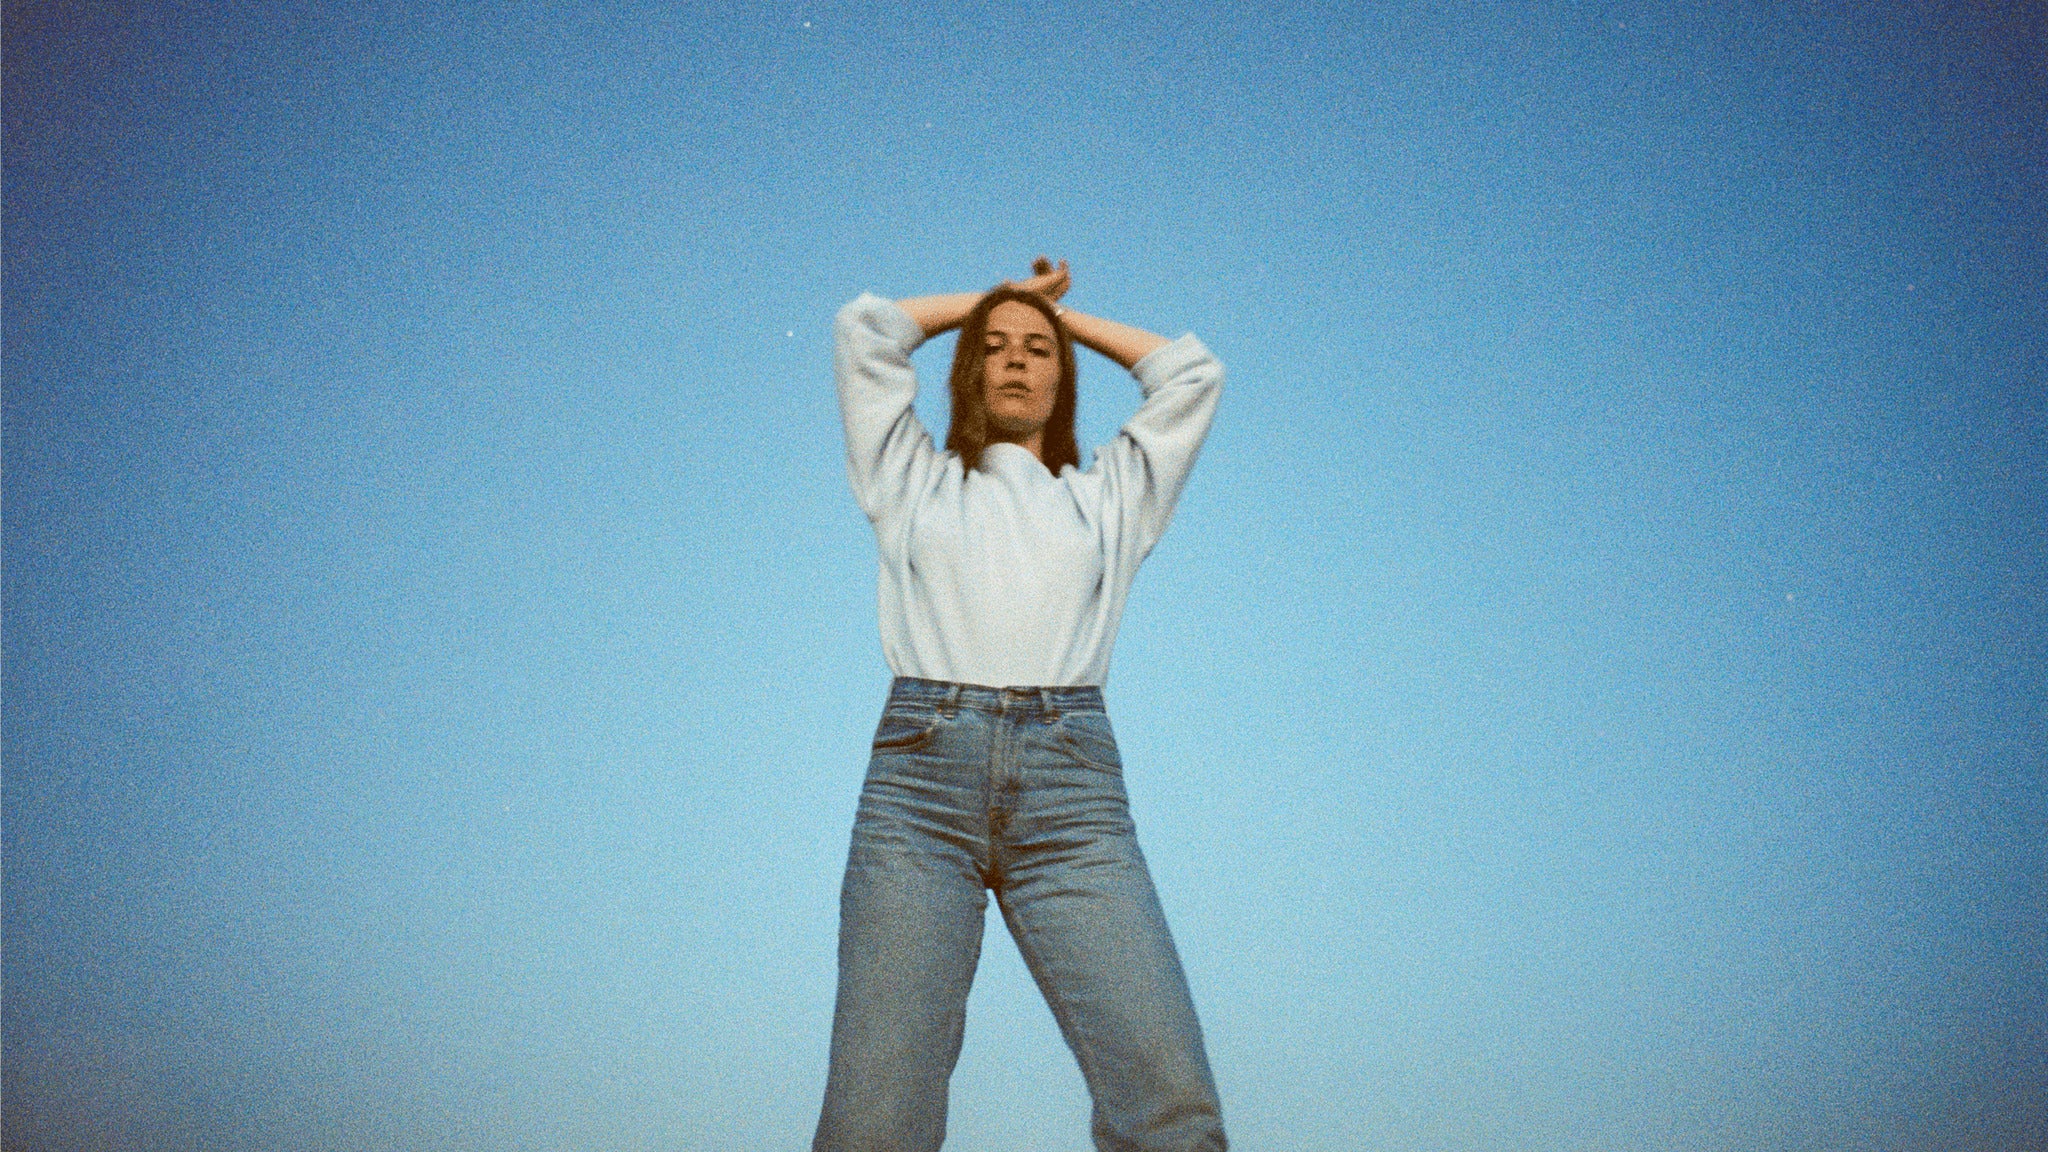 Maggie Rogers in Memphis promo photo for Official Platinum presale offer code